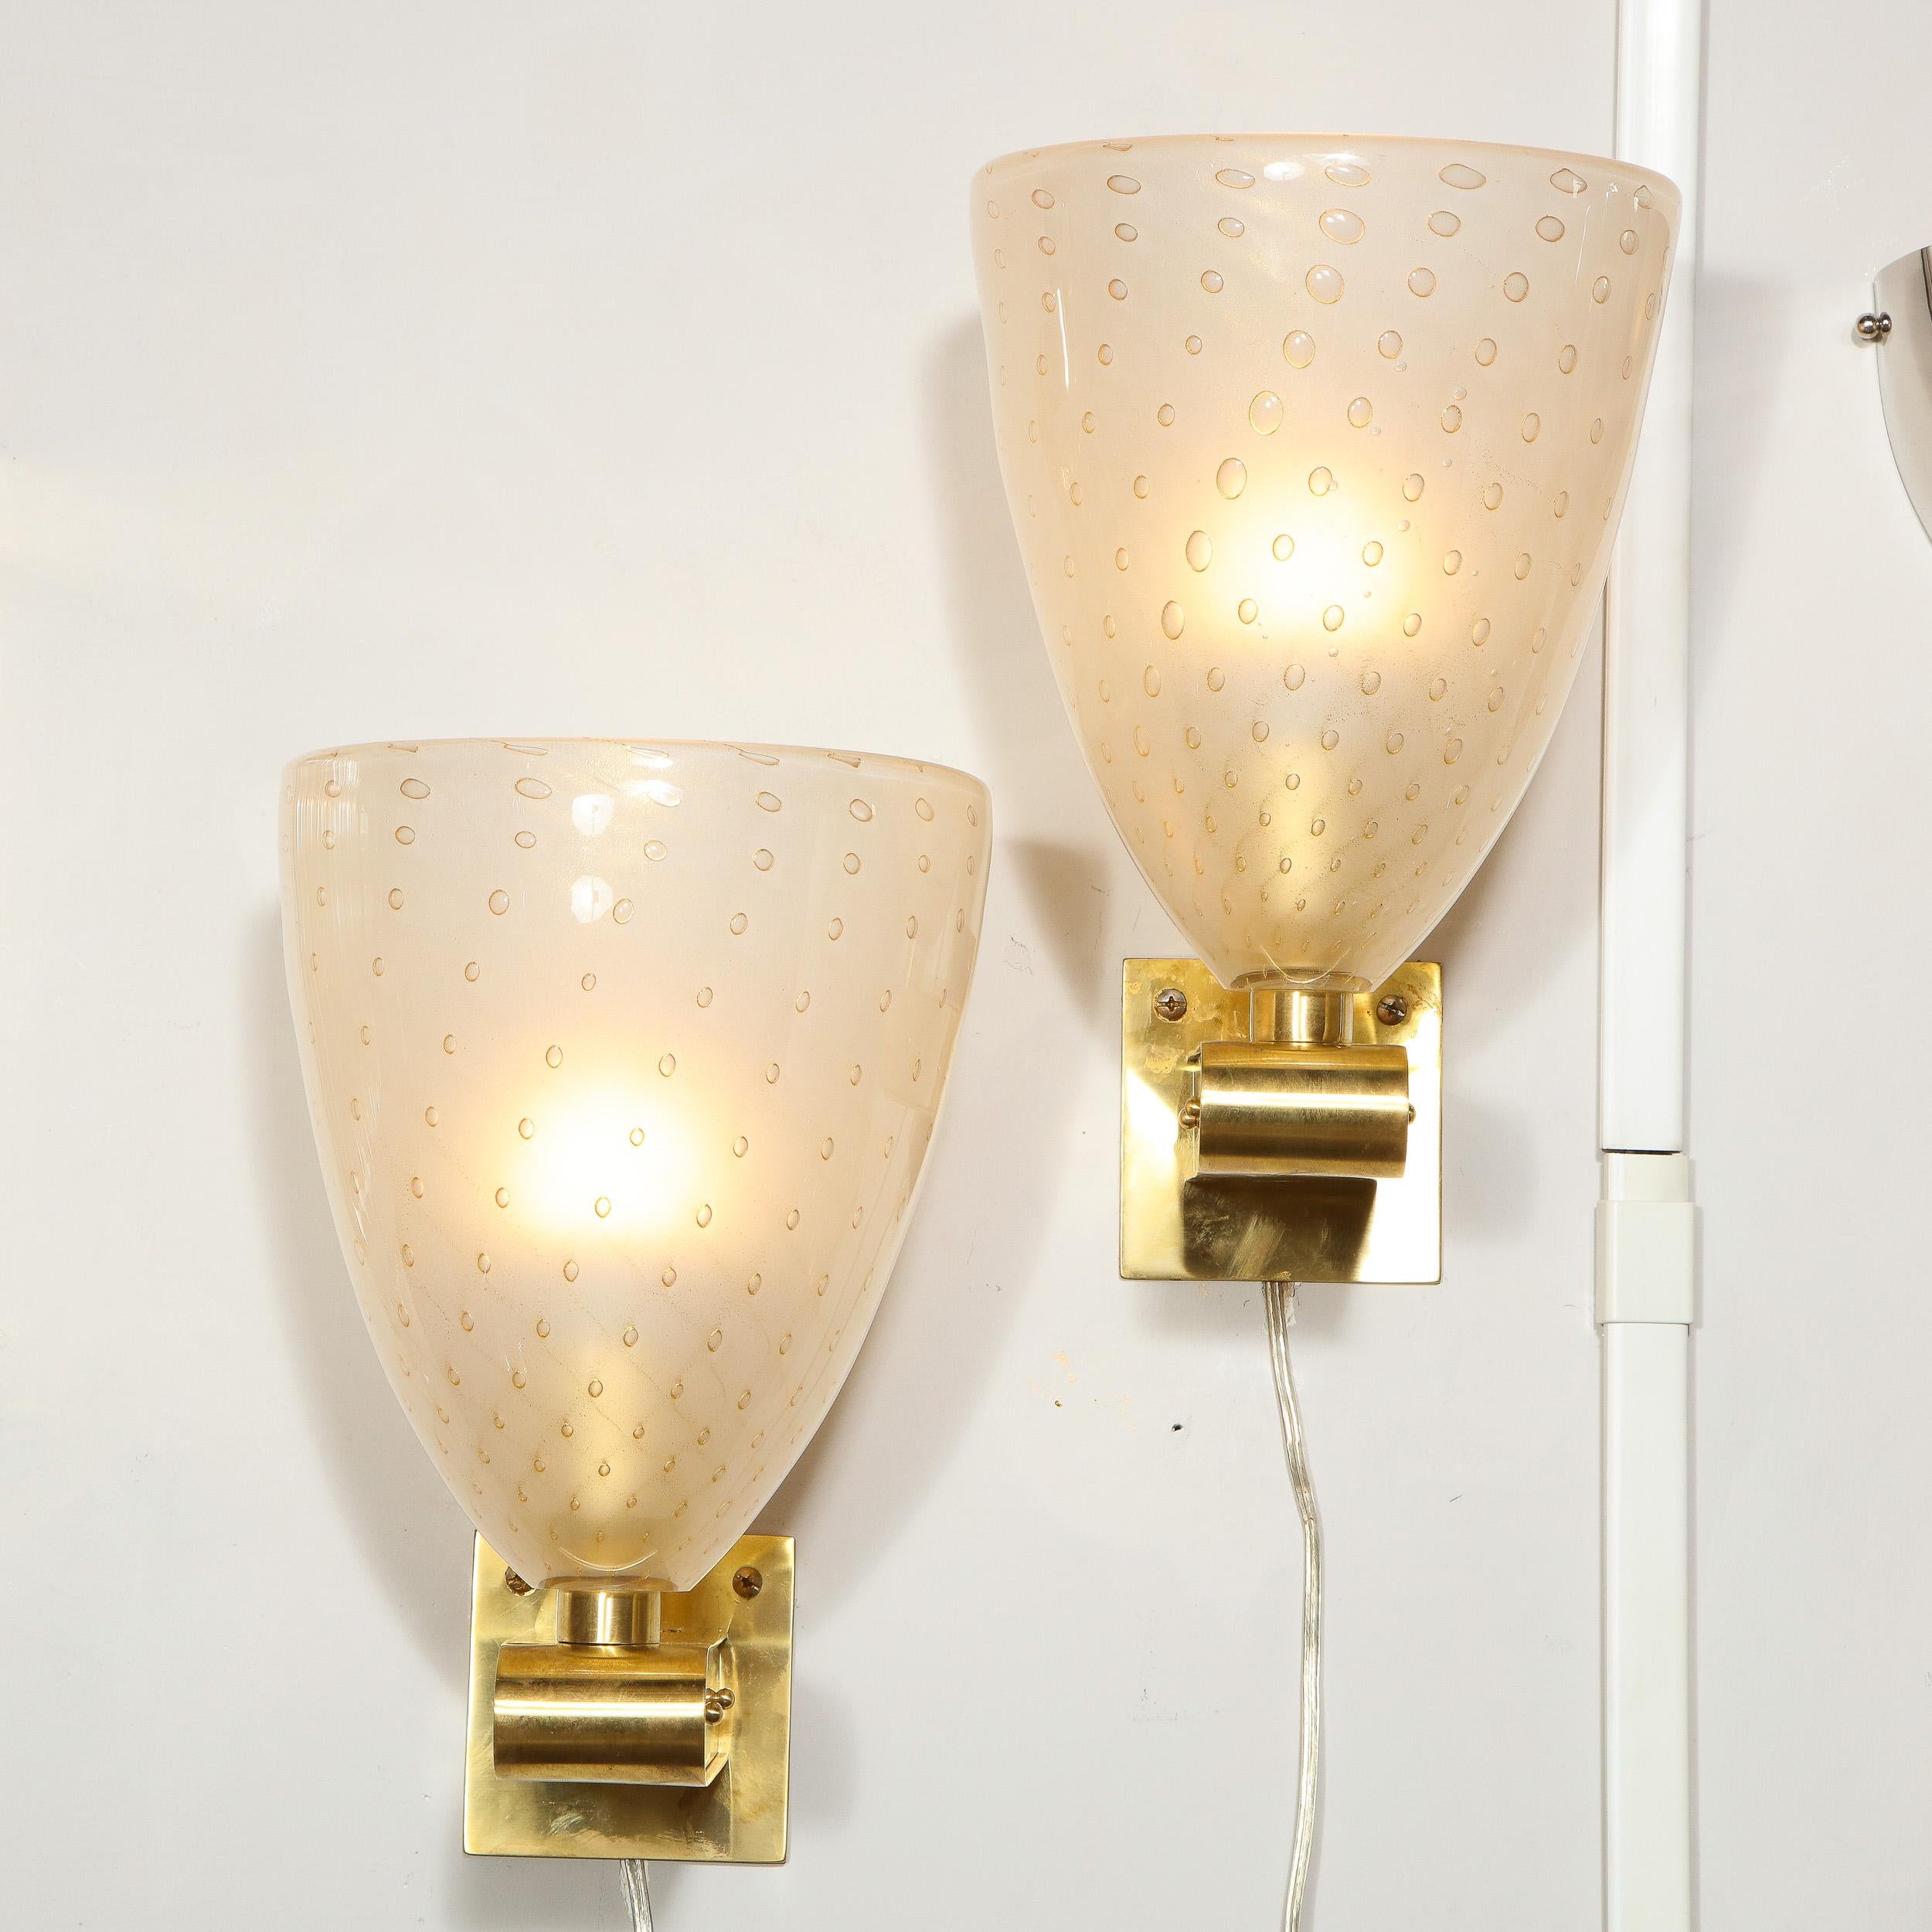 This gorgeous pair of sconces were hand blown in Murano, Italy- the islands off the coast of Venice renowned for centuries for their superlative glass production. They are composed of billowing semi-translucent glass shades with a subtle iridescent